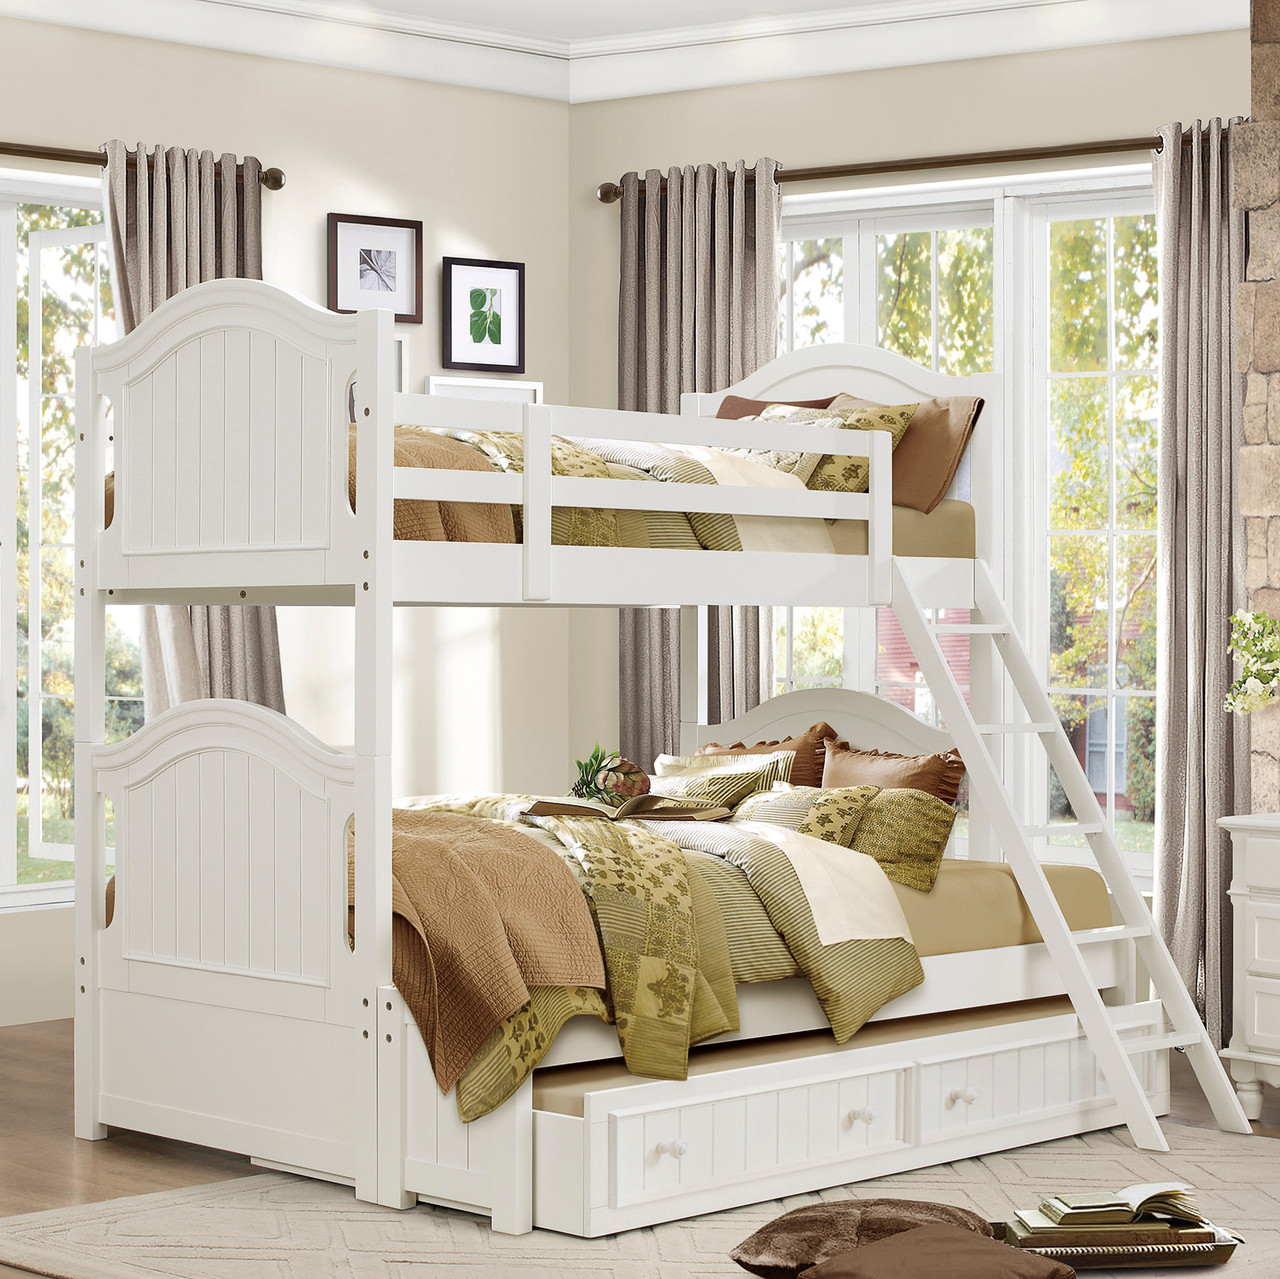 Park River Twin Full Bunk Bed in White with Trundle